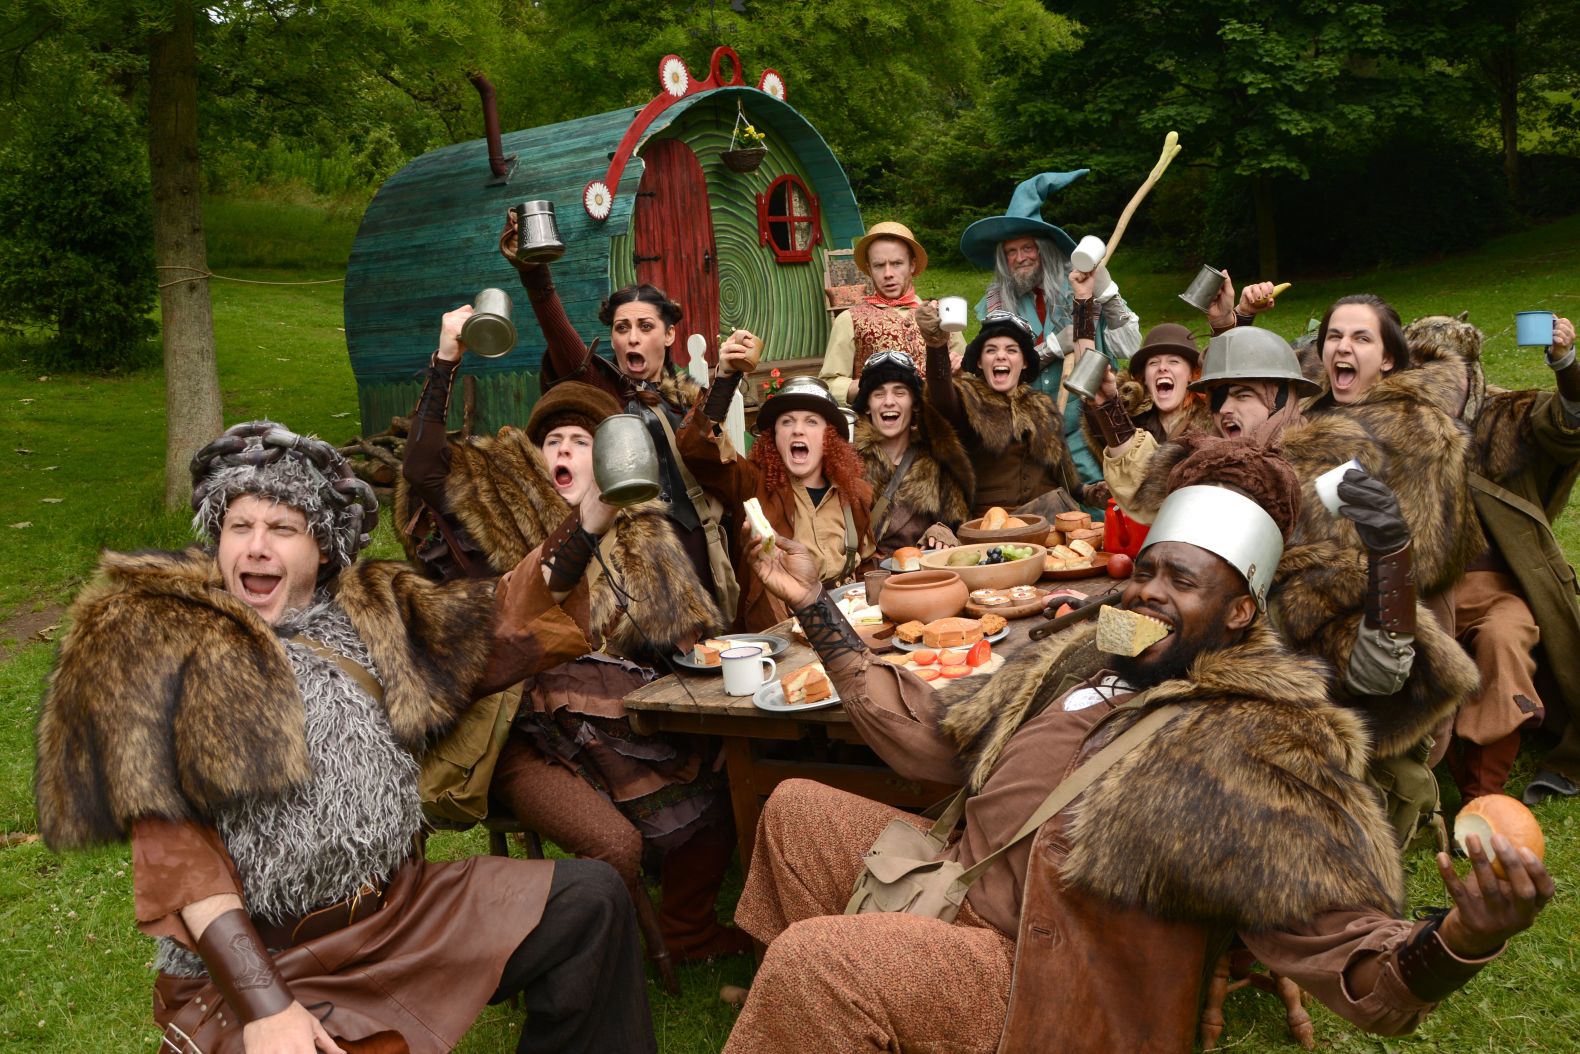 Actors dressed as hobbits raise there drinks in glee